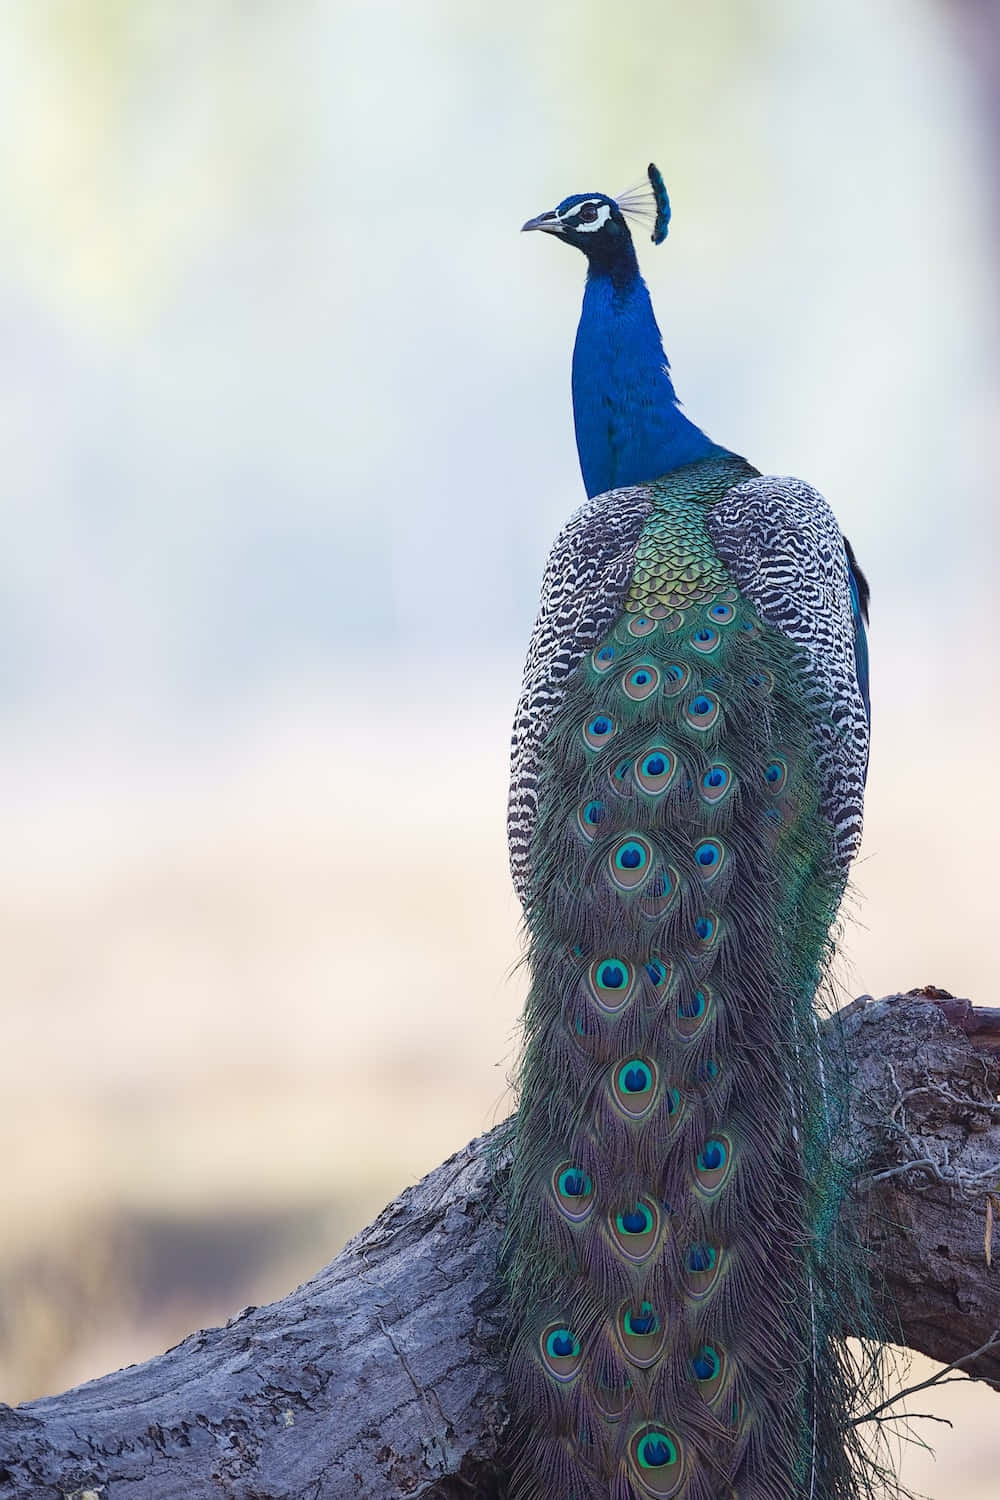 A majestic peacock stands tall, showing off its beautiful feathers.